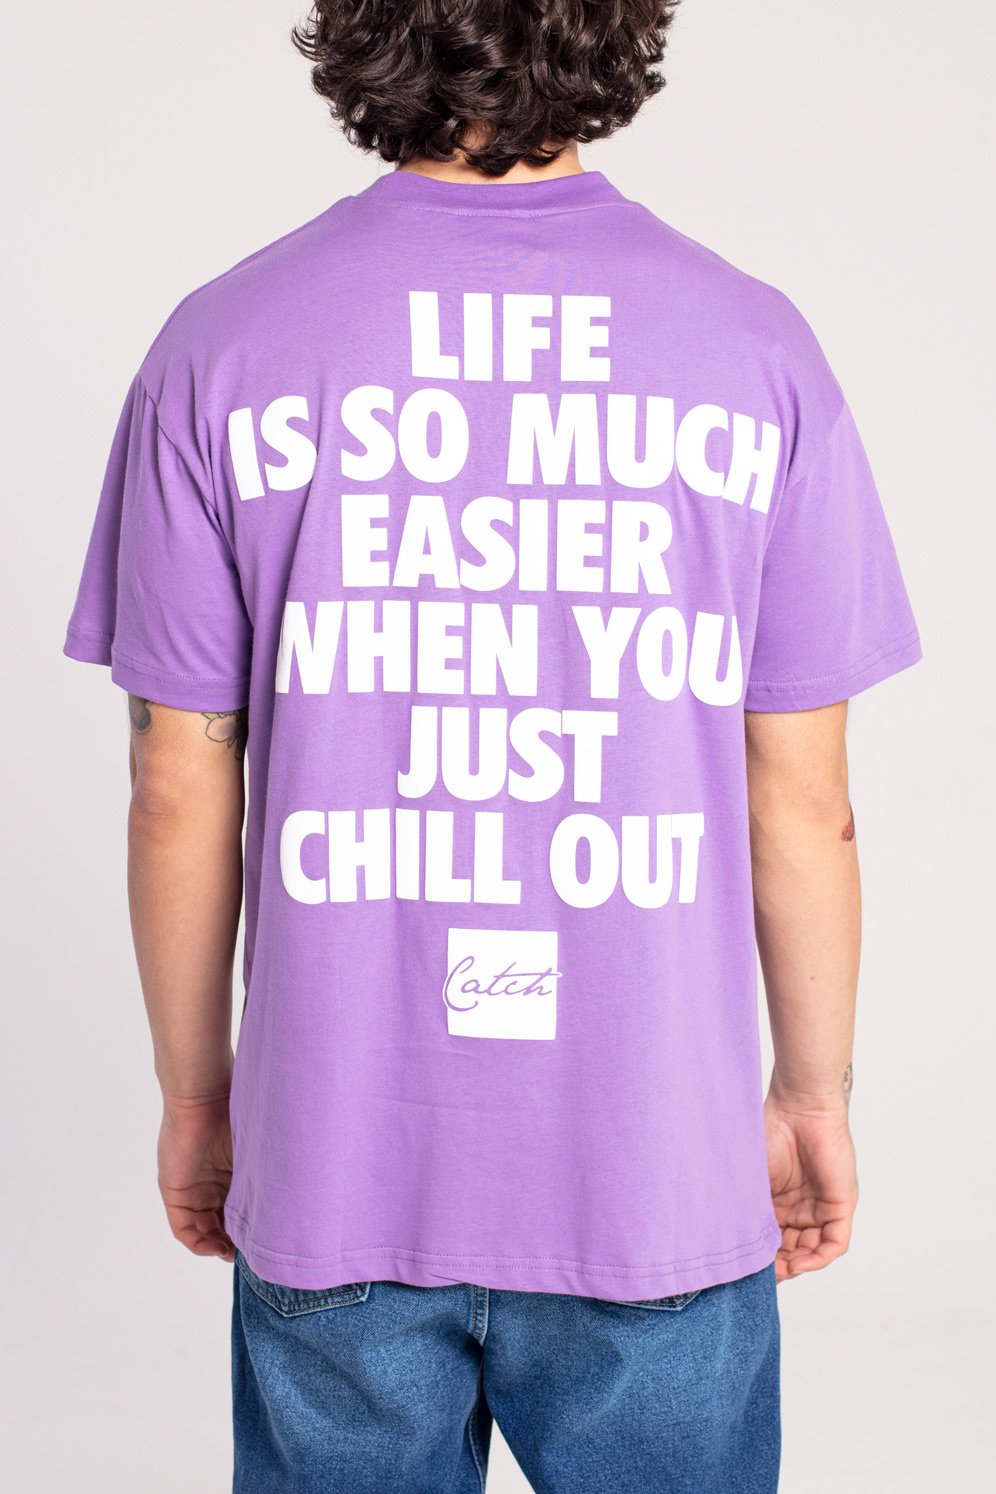 T-SHIRT OVERSIZE JUST CHILL OUT - COLORE VIOLA